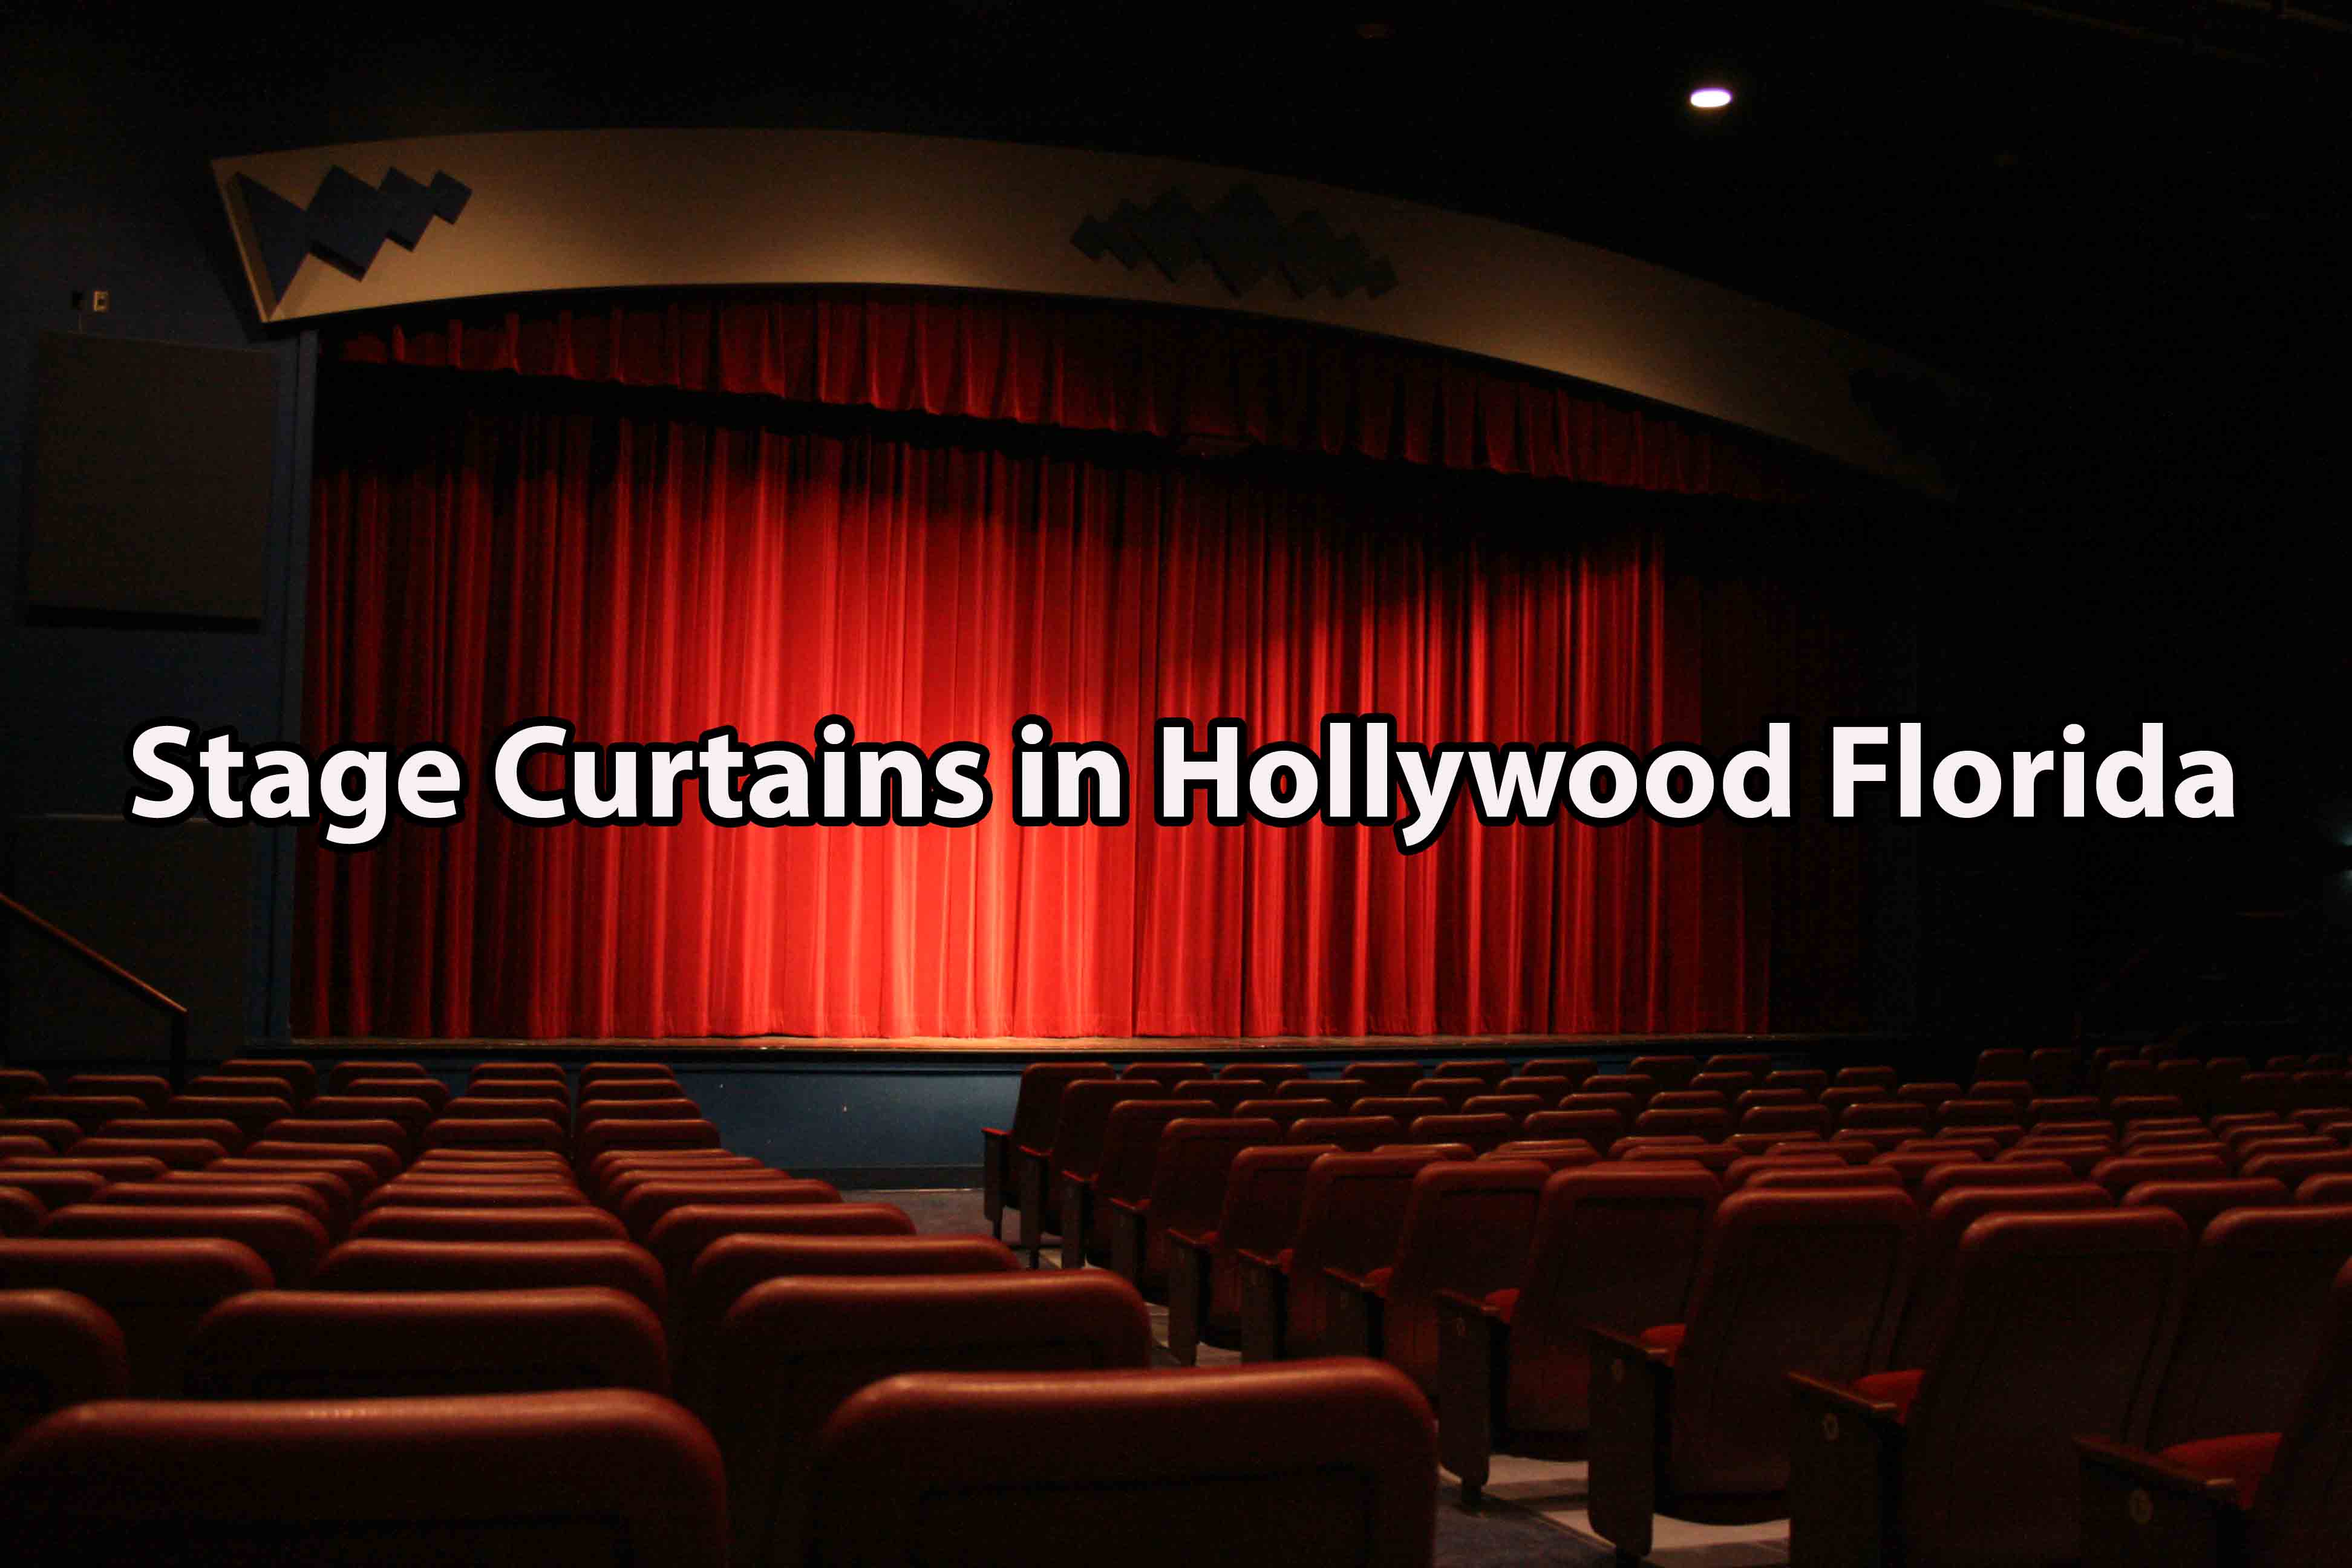 Stage Curtains in Hollywood Florida